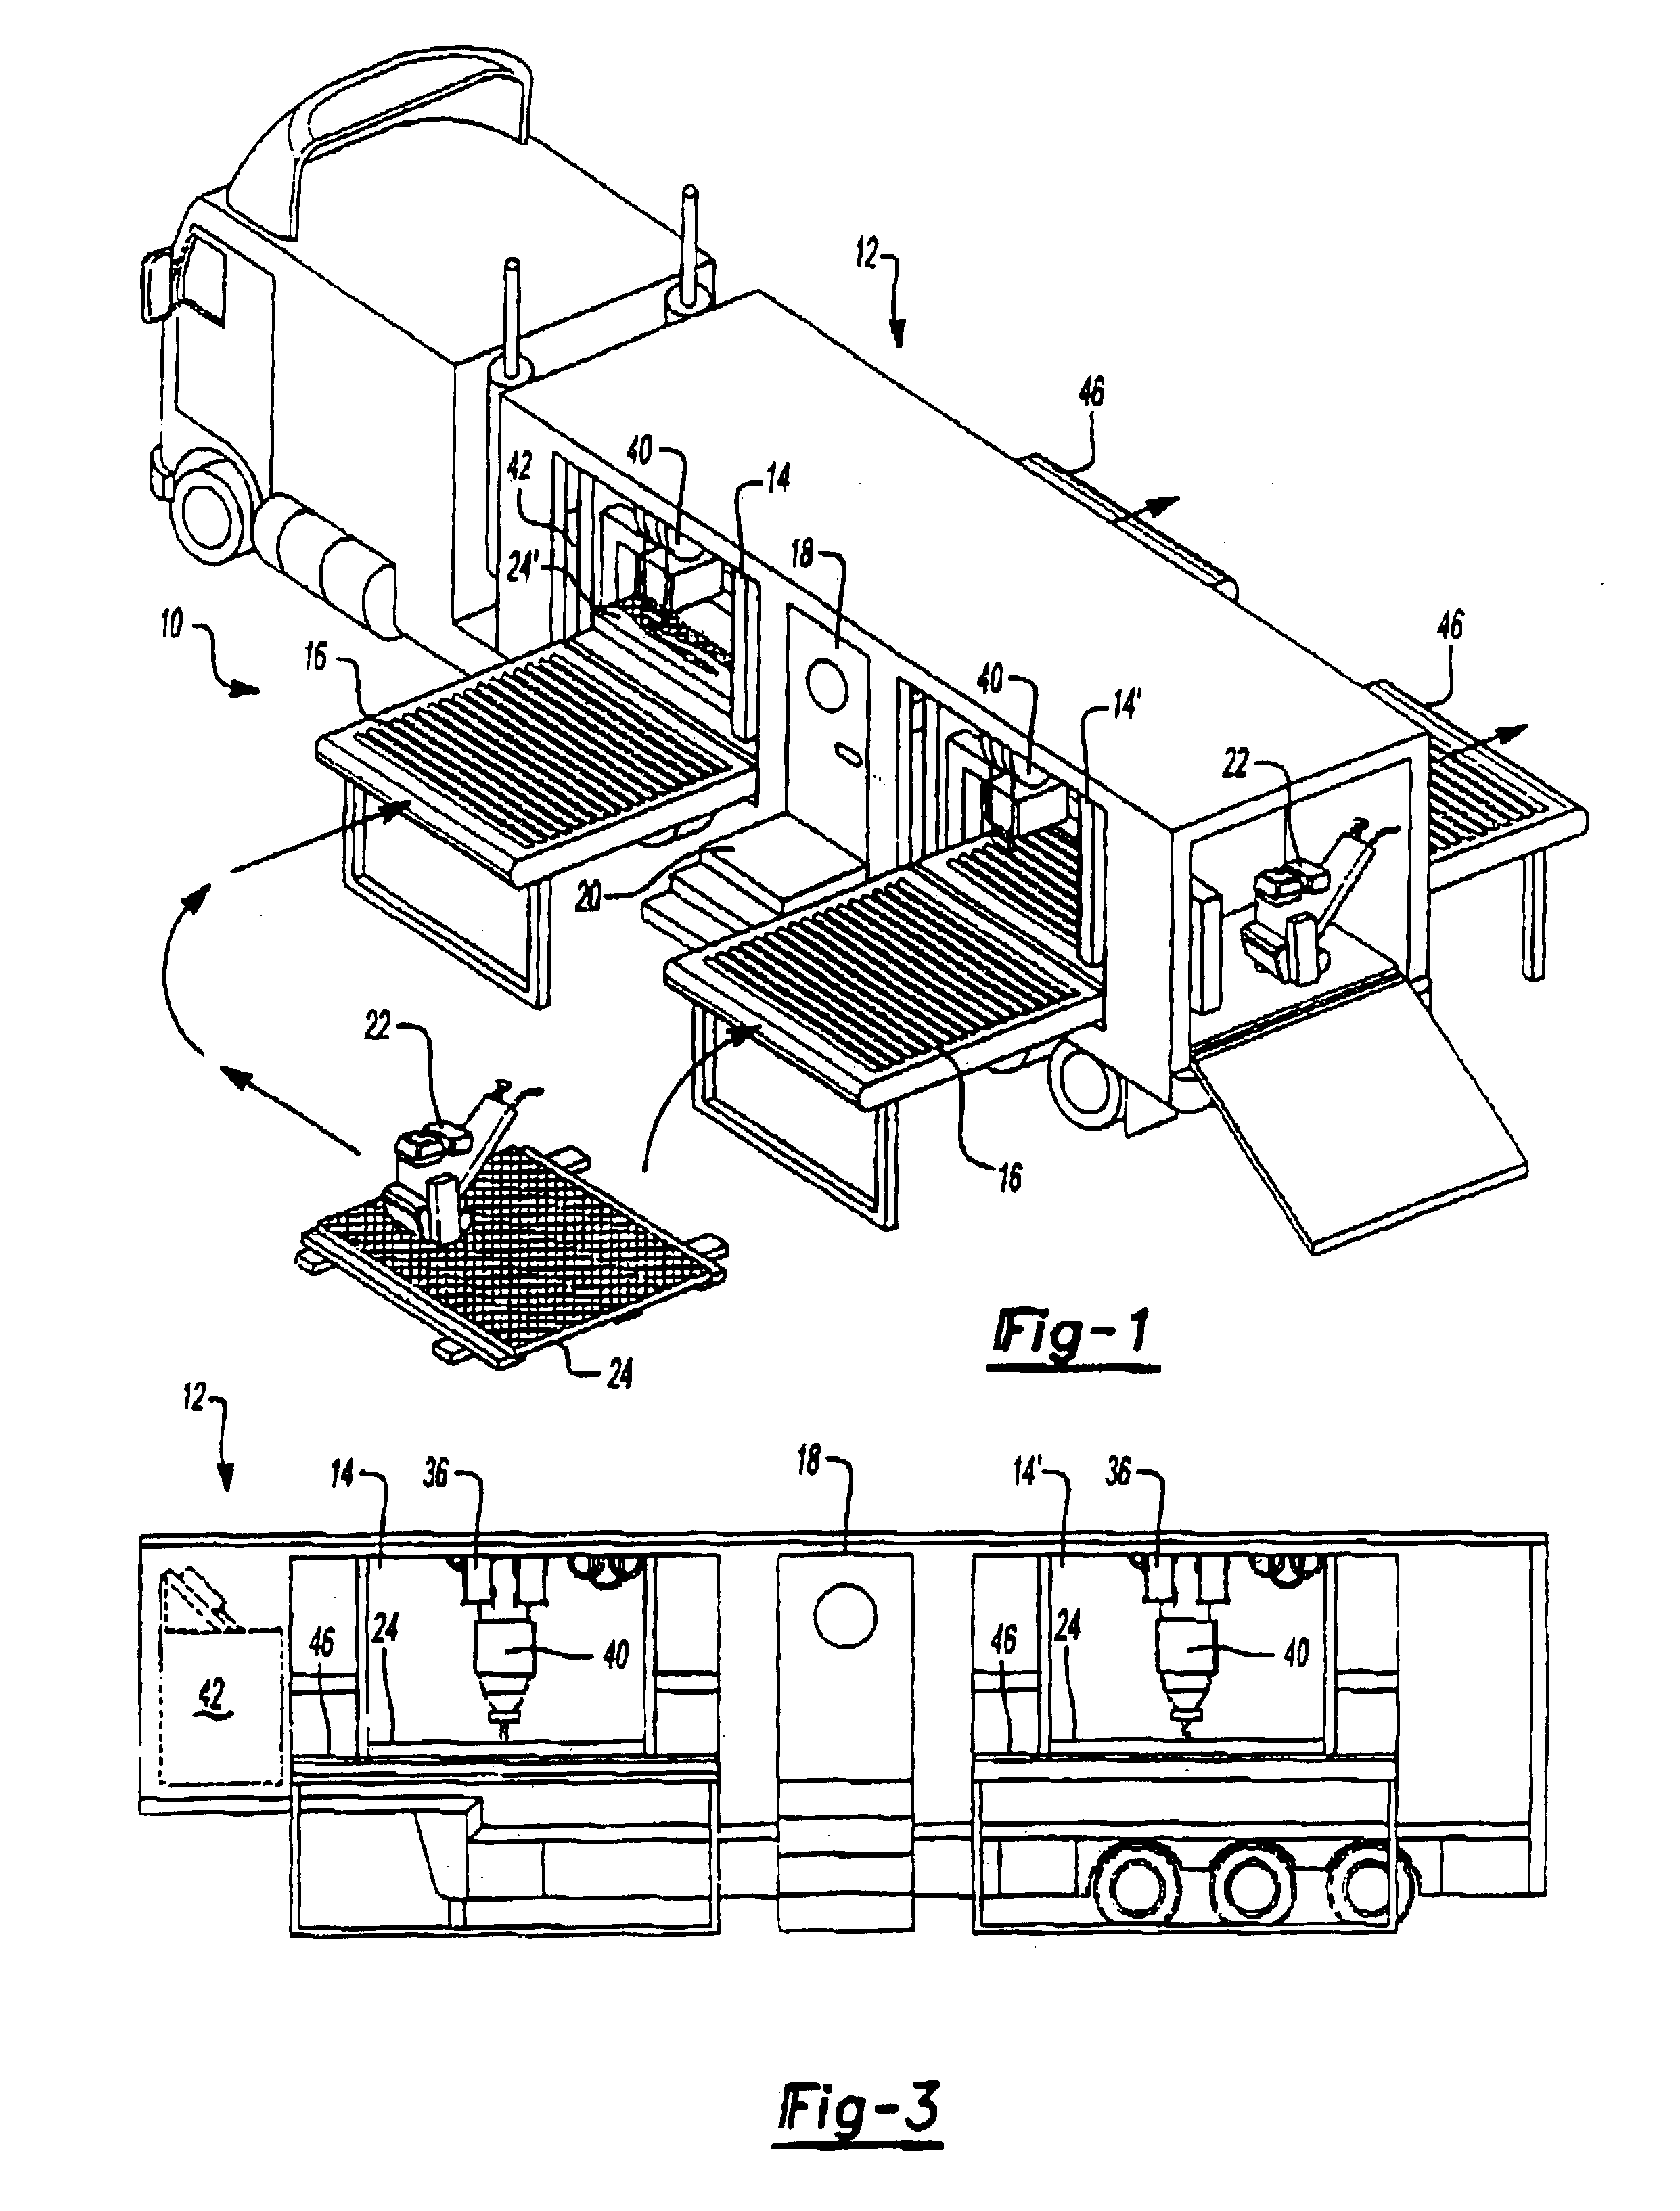 Portable manufacturing facility for manufacturing anti-slip flooring and method of manufacturing